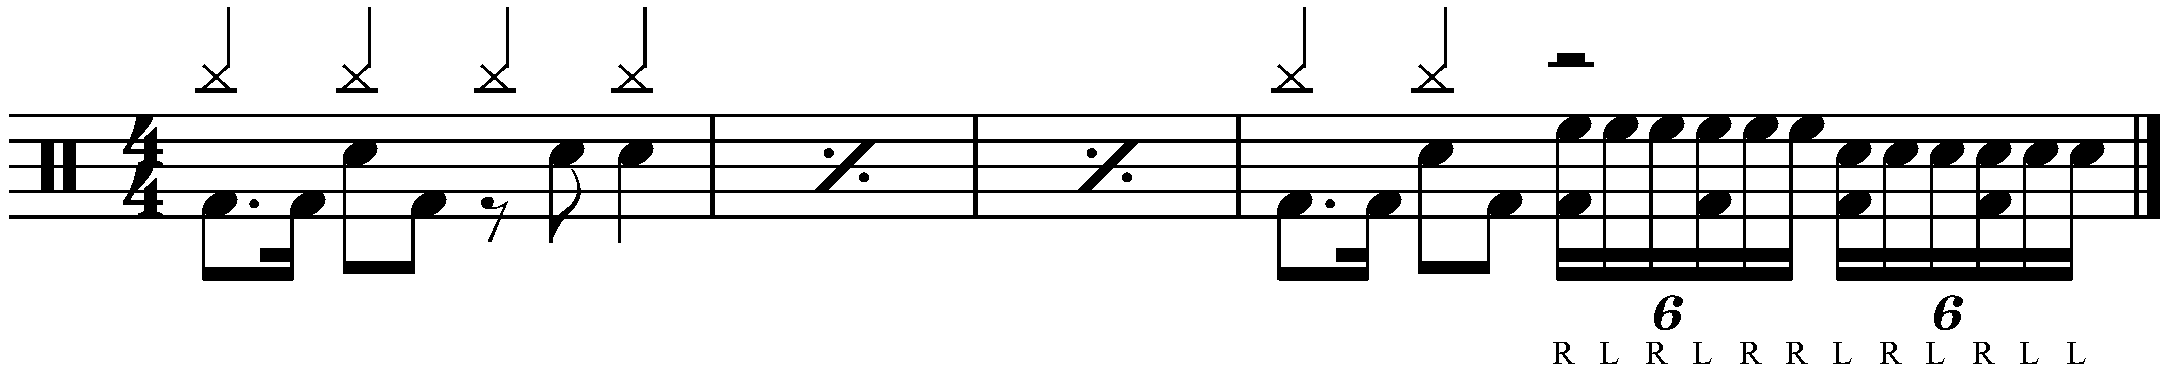 A four bar pattern using a simple double paradiddle fill